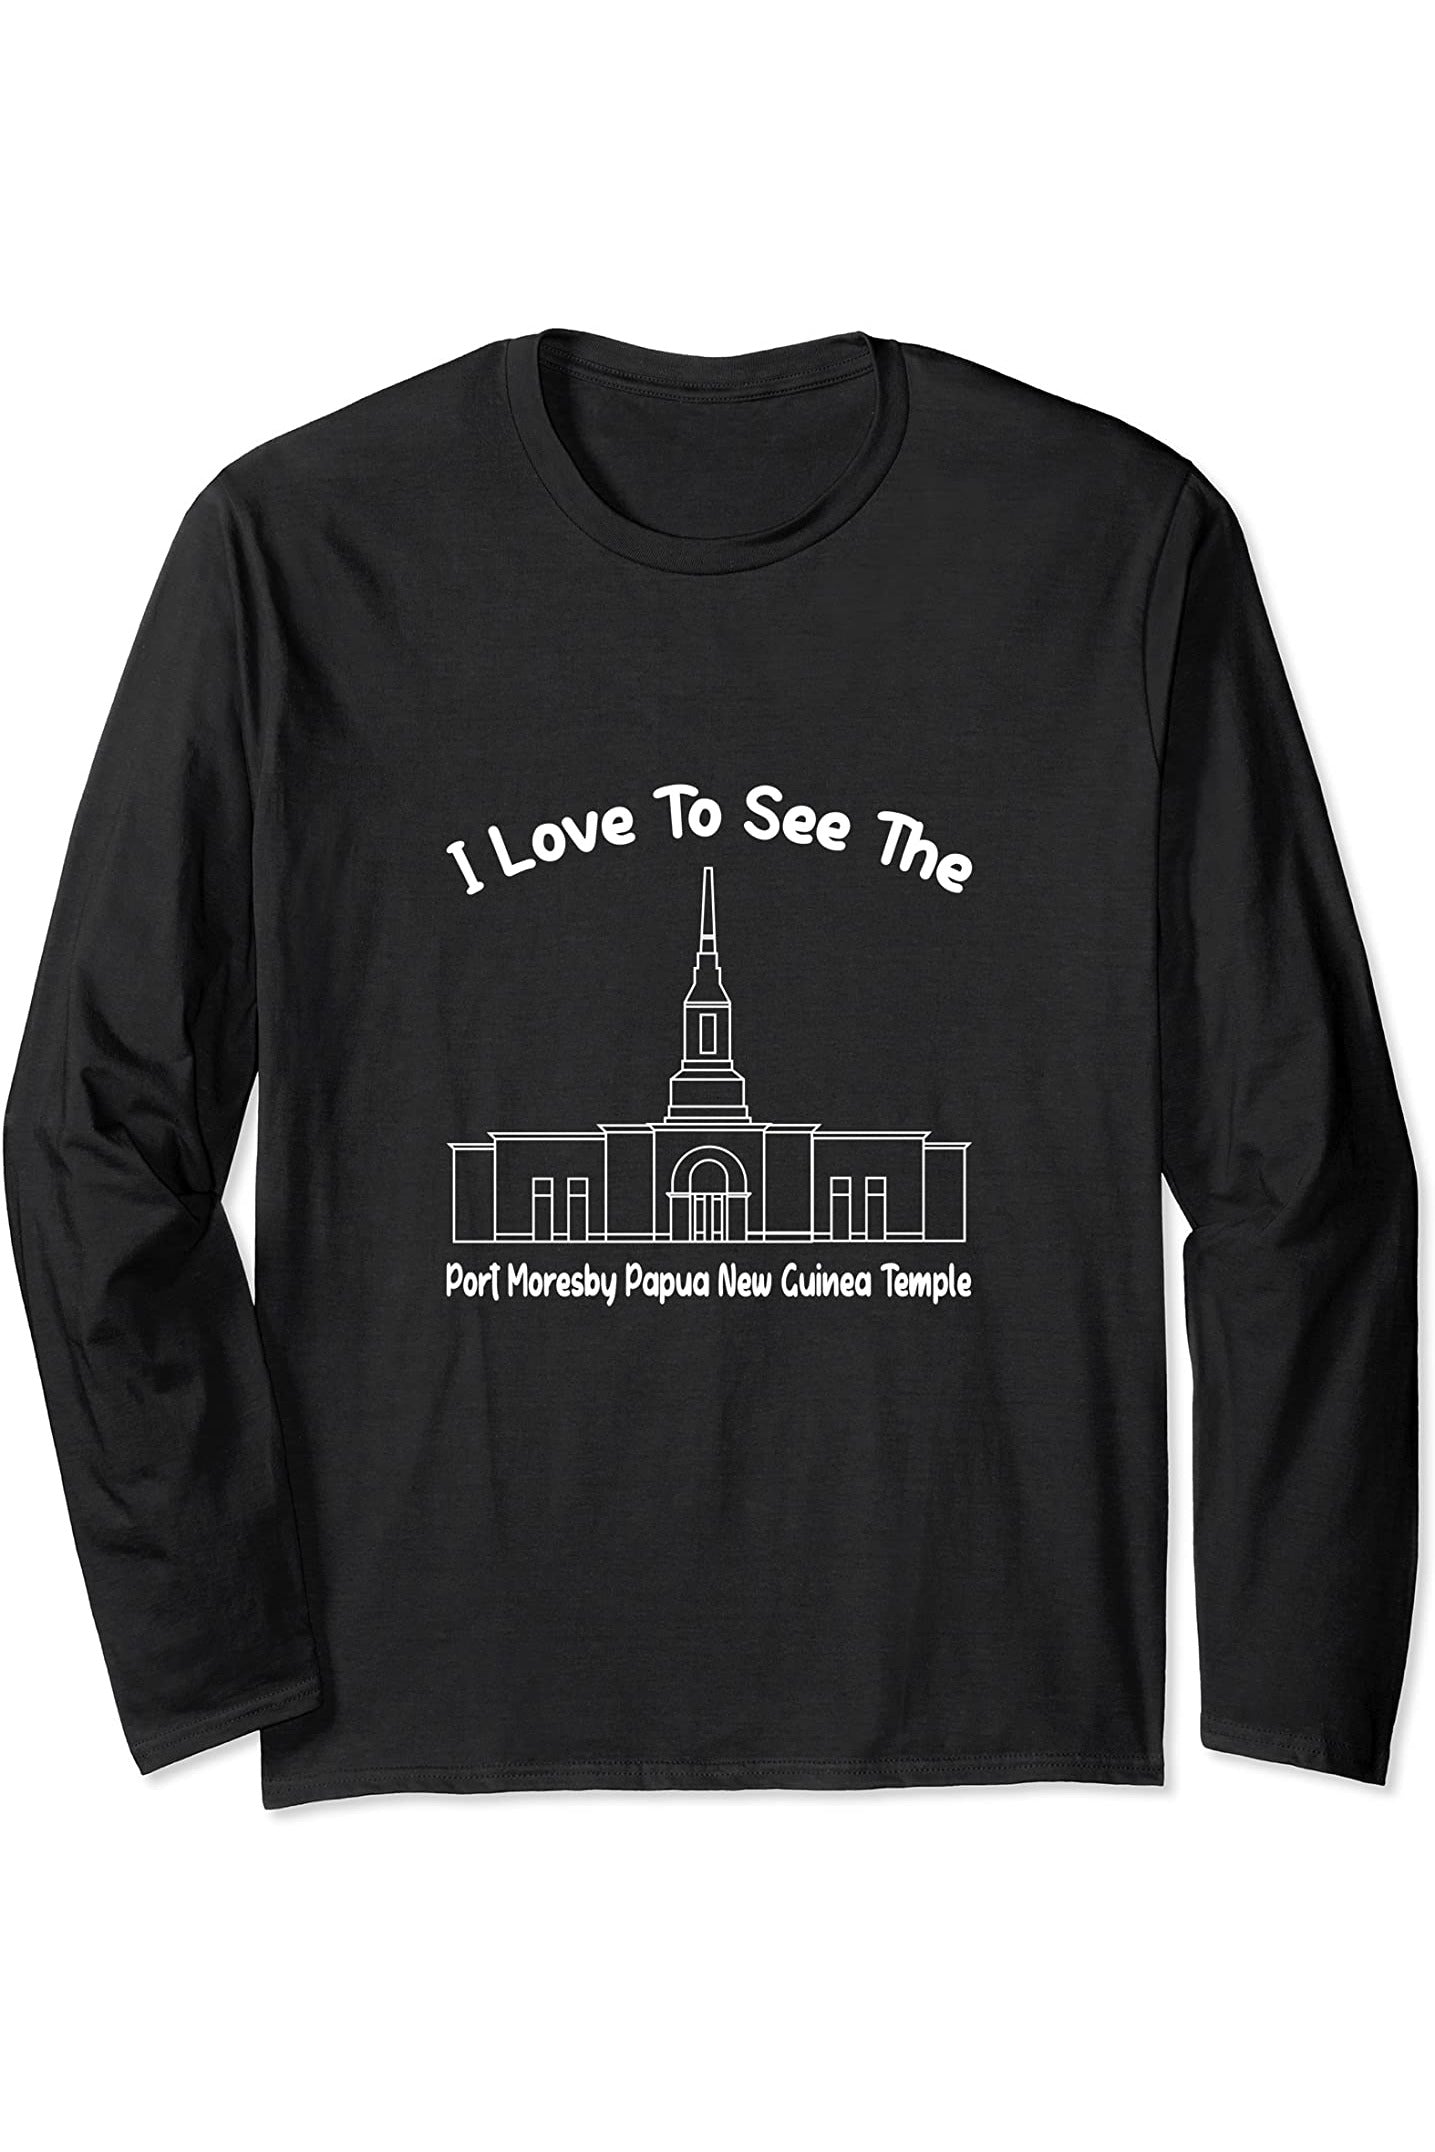 Port Moresby Papua New Guinea Temple Long Sleeve T-Shirt - Primary Style (English) US